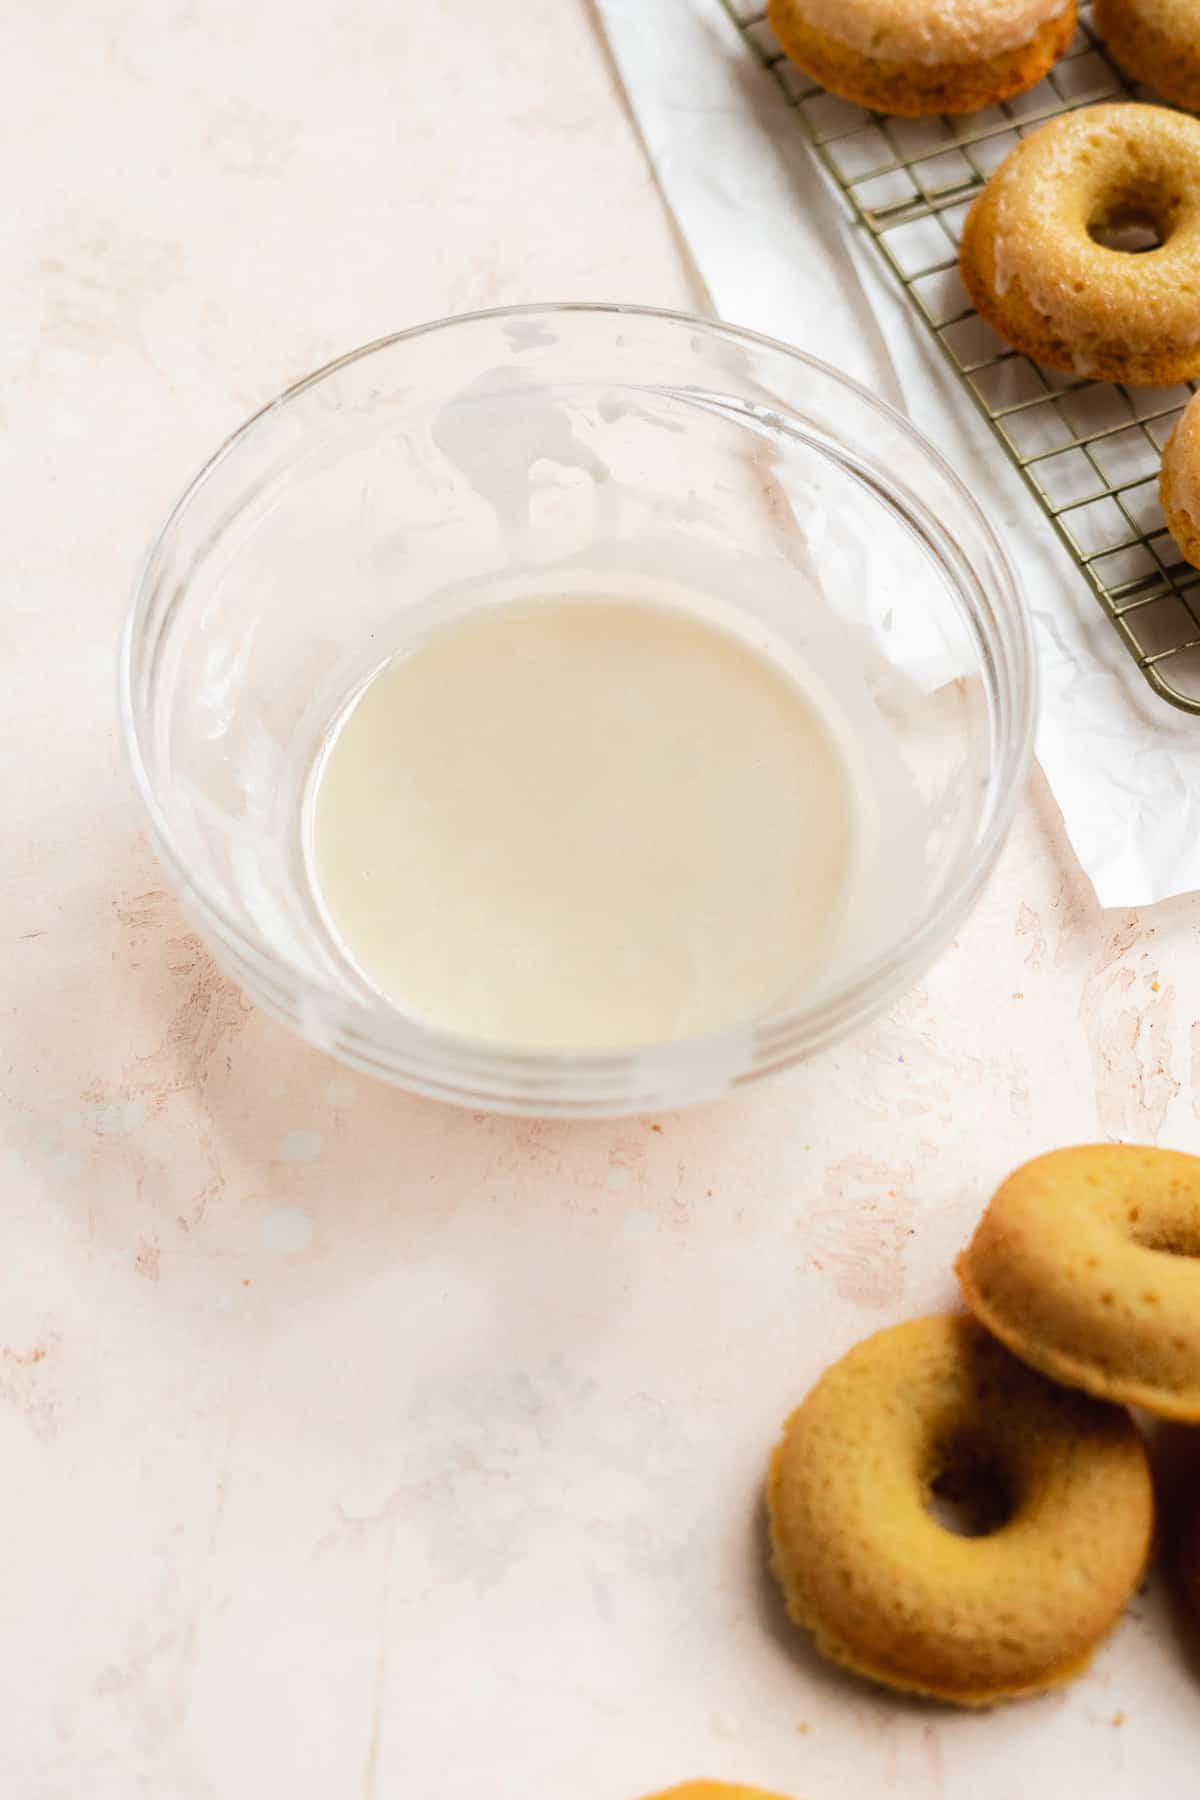 Glass bowl with vanilla glaze inside and donuts on the side.